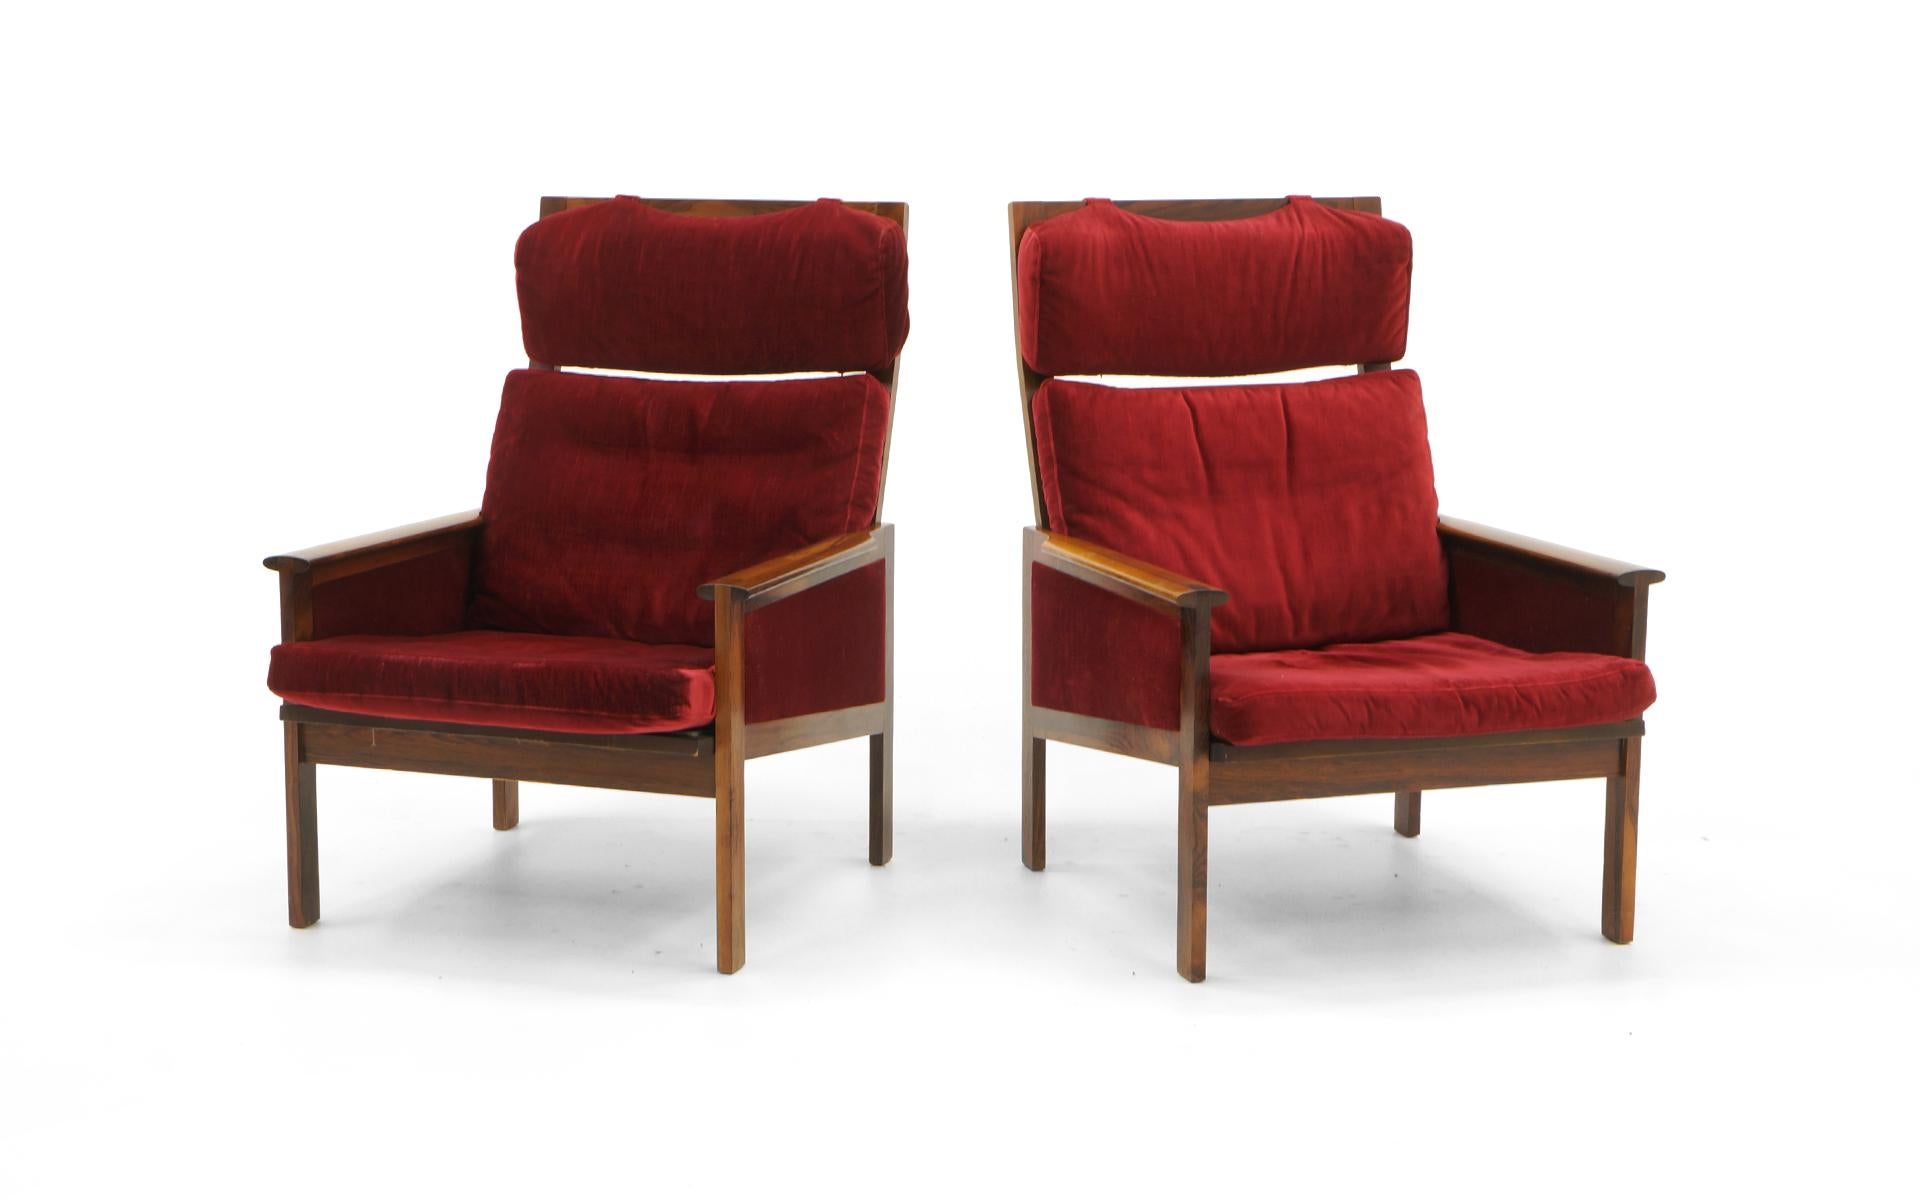 Scandinavian Modern Pair of High Back Lounge Chairs by Illum Wikkelso, Rosewood and Red Velvet